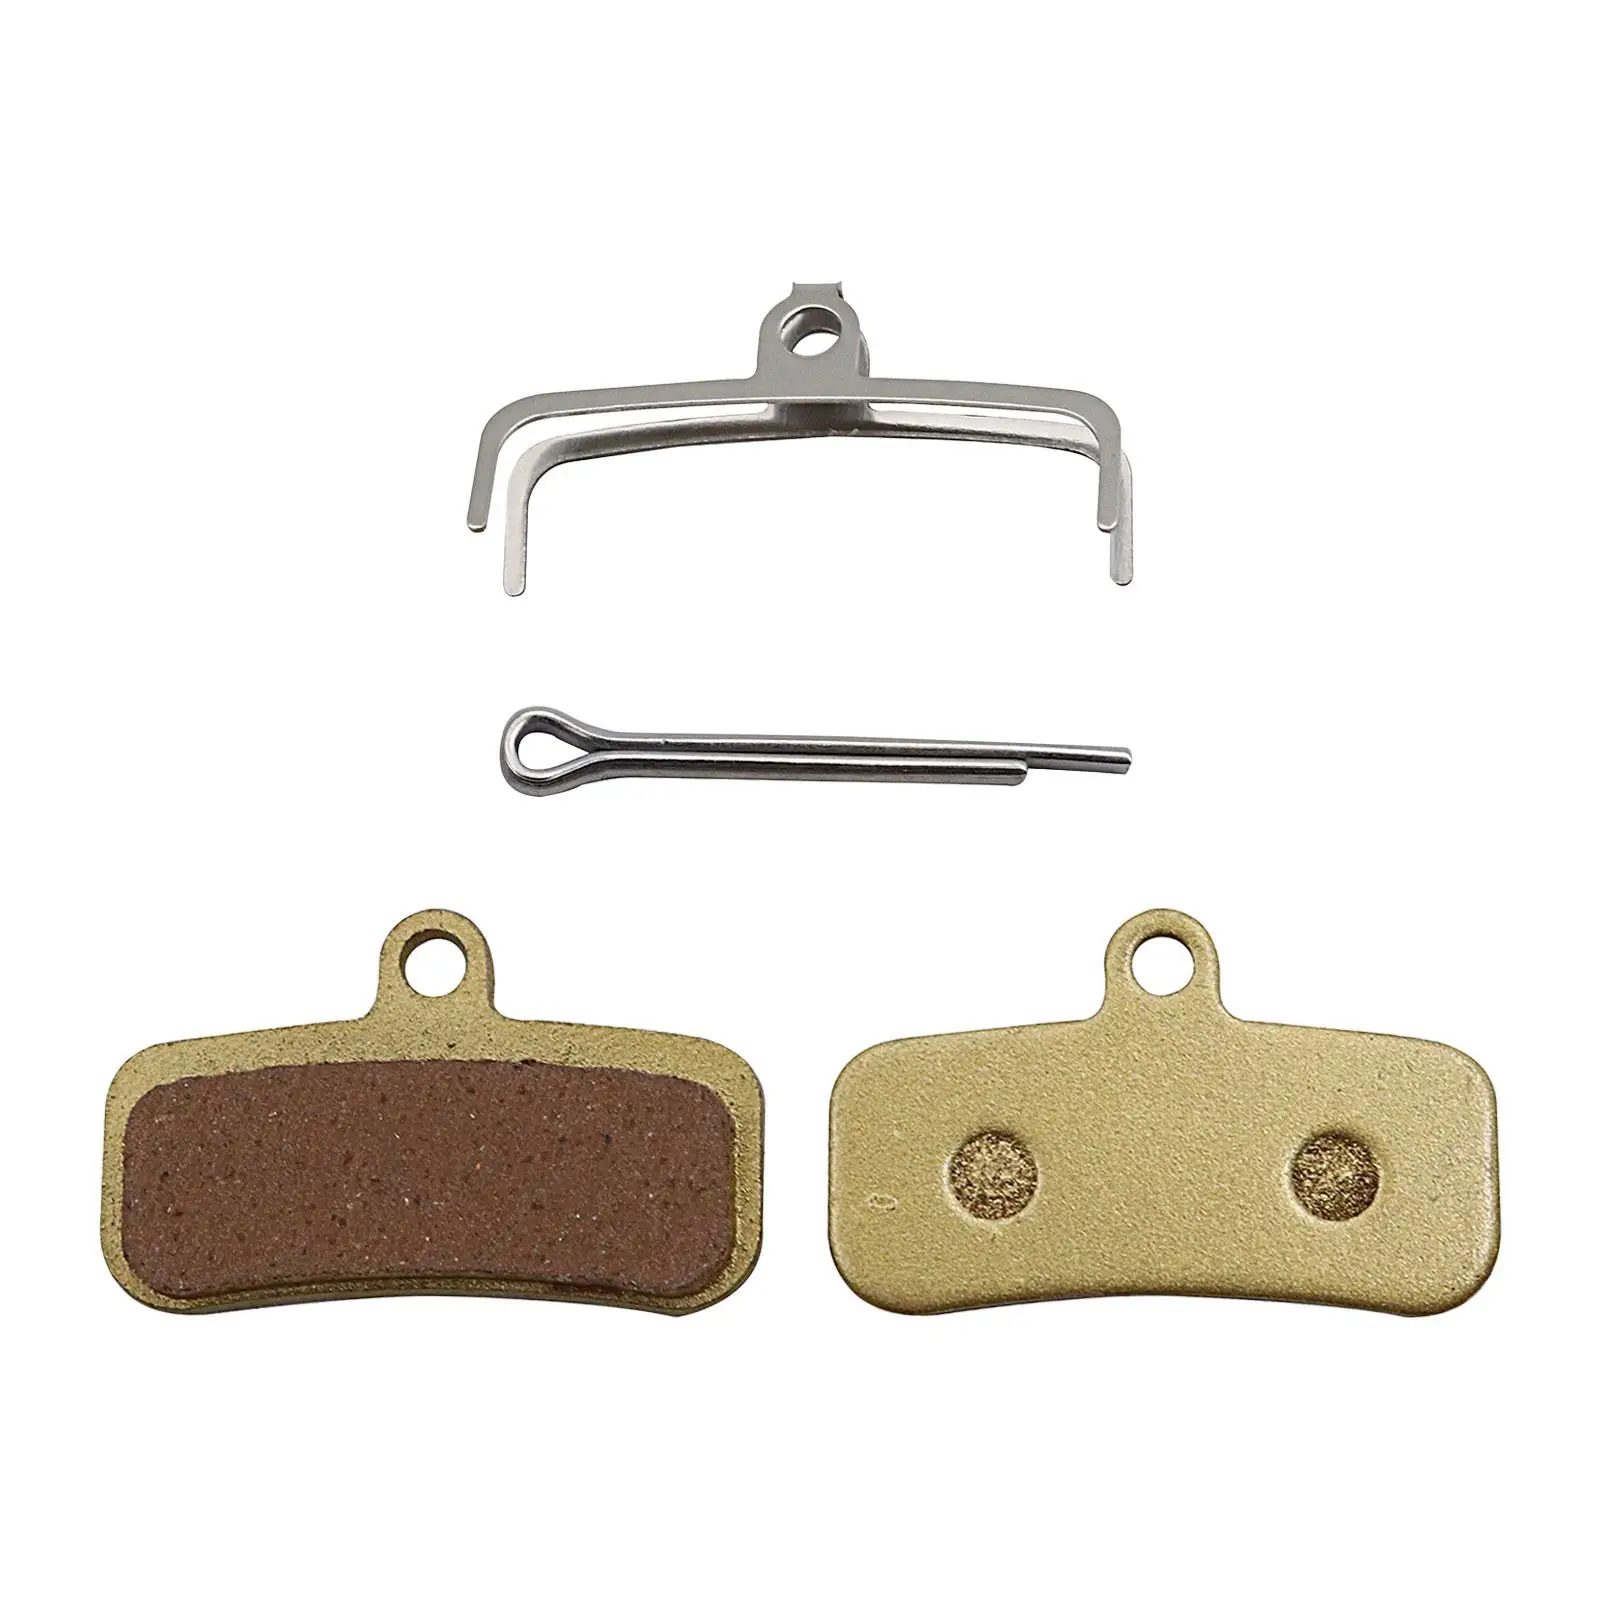 2x Motorcycle Front and Rear Brake Pads Motocross Modification Accessories for